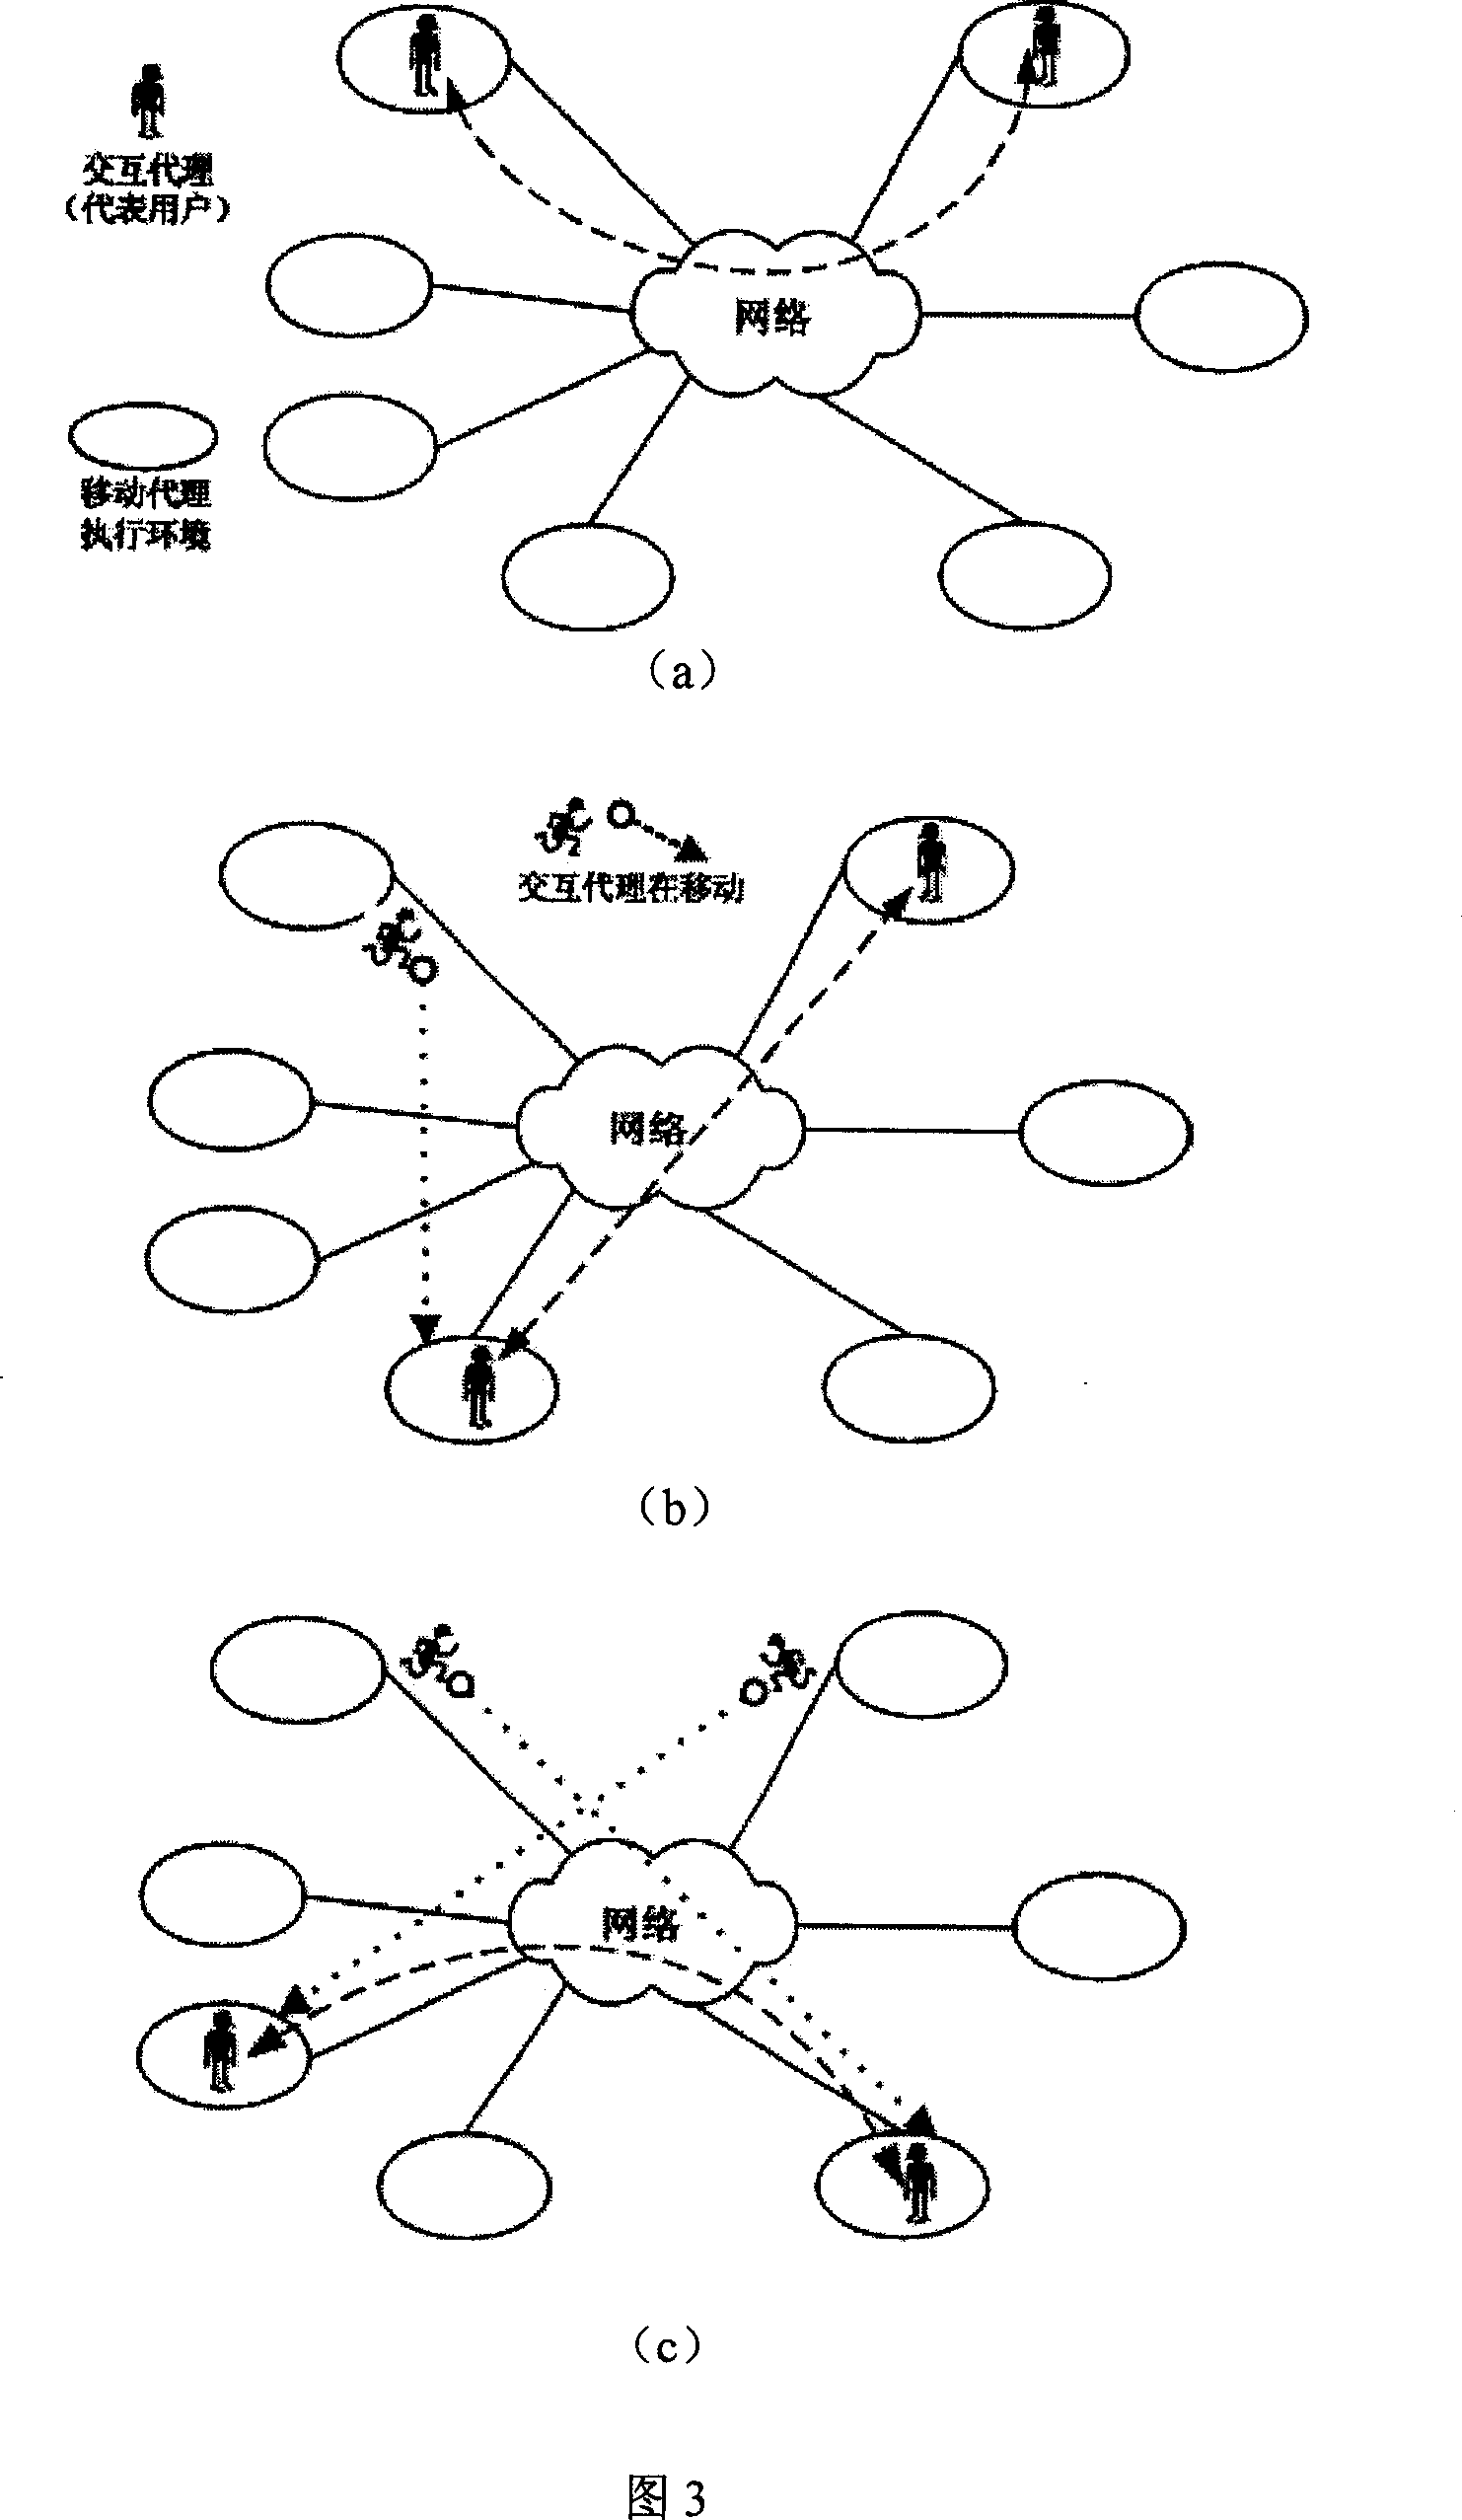 Mobile agent based network distributed interacting method